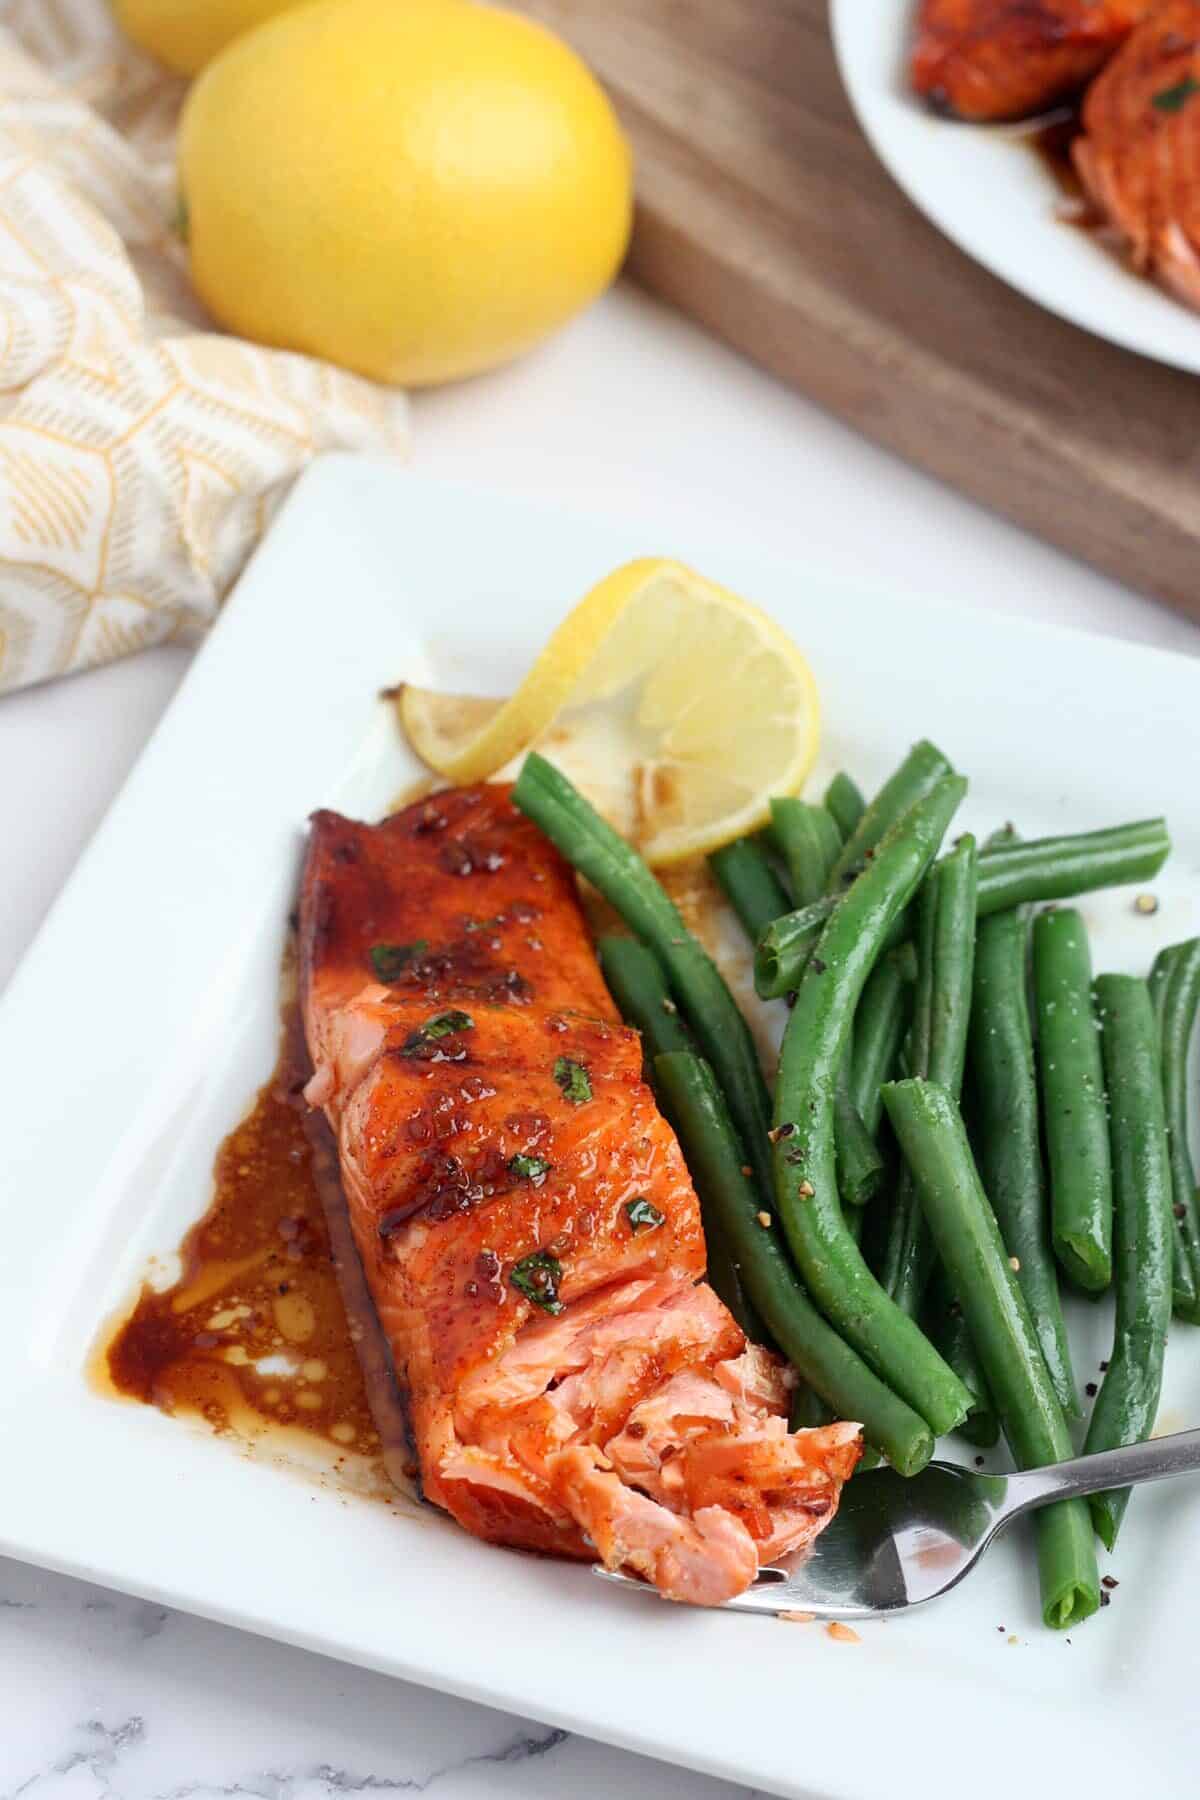 honey garlic salmon fillet with green beans on the side and a wedge of lemon